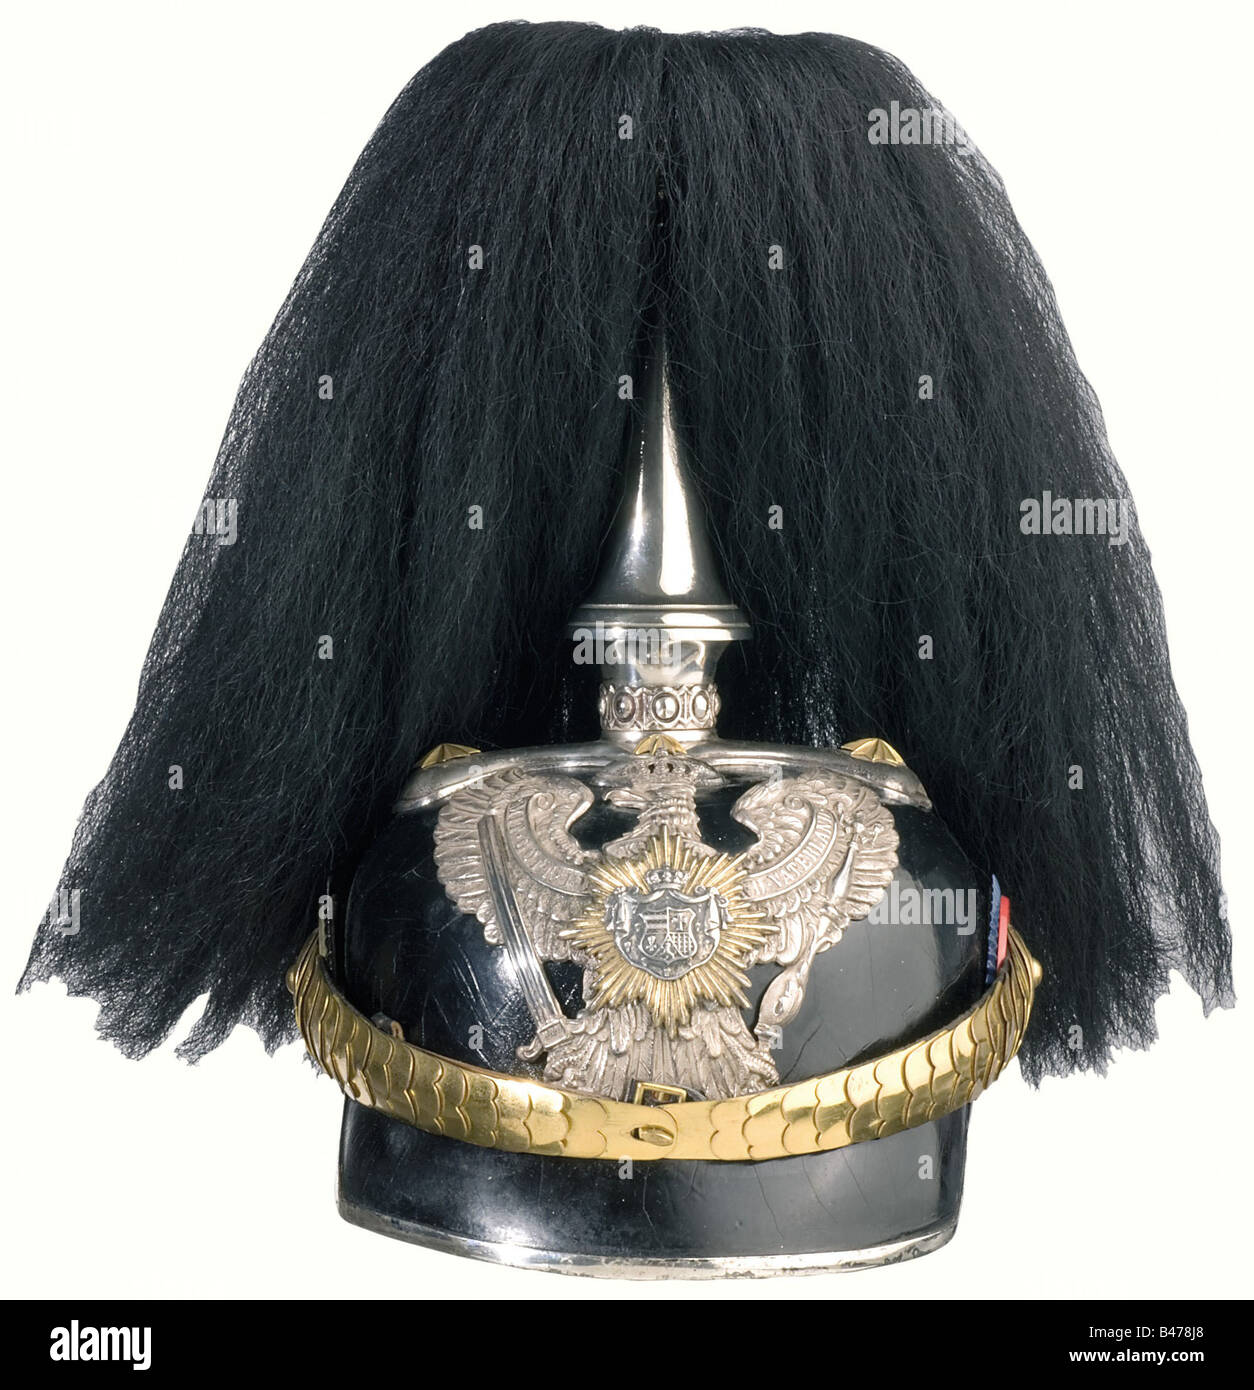 A helmet for officers, of the 19th Dragoon Regiment. Leather skull with silver-plated mountings. Small star, and metal chinscales are gilded. There is a gold-plated star with the silver national coat of arms on the dragoon eagle. Officer's cockades. Conical socket with black buffalo hair plume. Beige, ribbed silk lining. Rare helmet in good condition. historic, historical, 19th century, helmet, helmets, headgear, headgears, protection, protective, uniform, uniforms, utensil, piece of equipment, utensils, outfit, outfits, headpiece, headpieces, object, objects, , Stock Photo